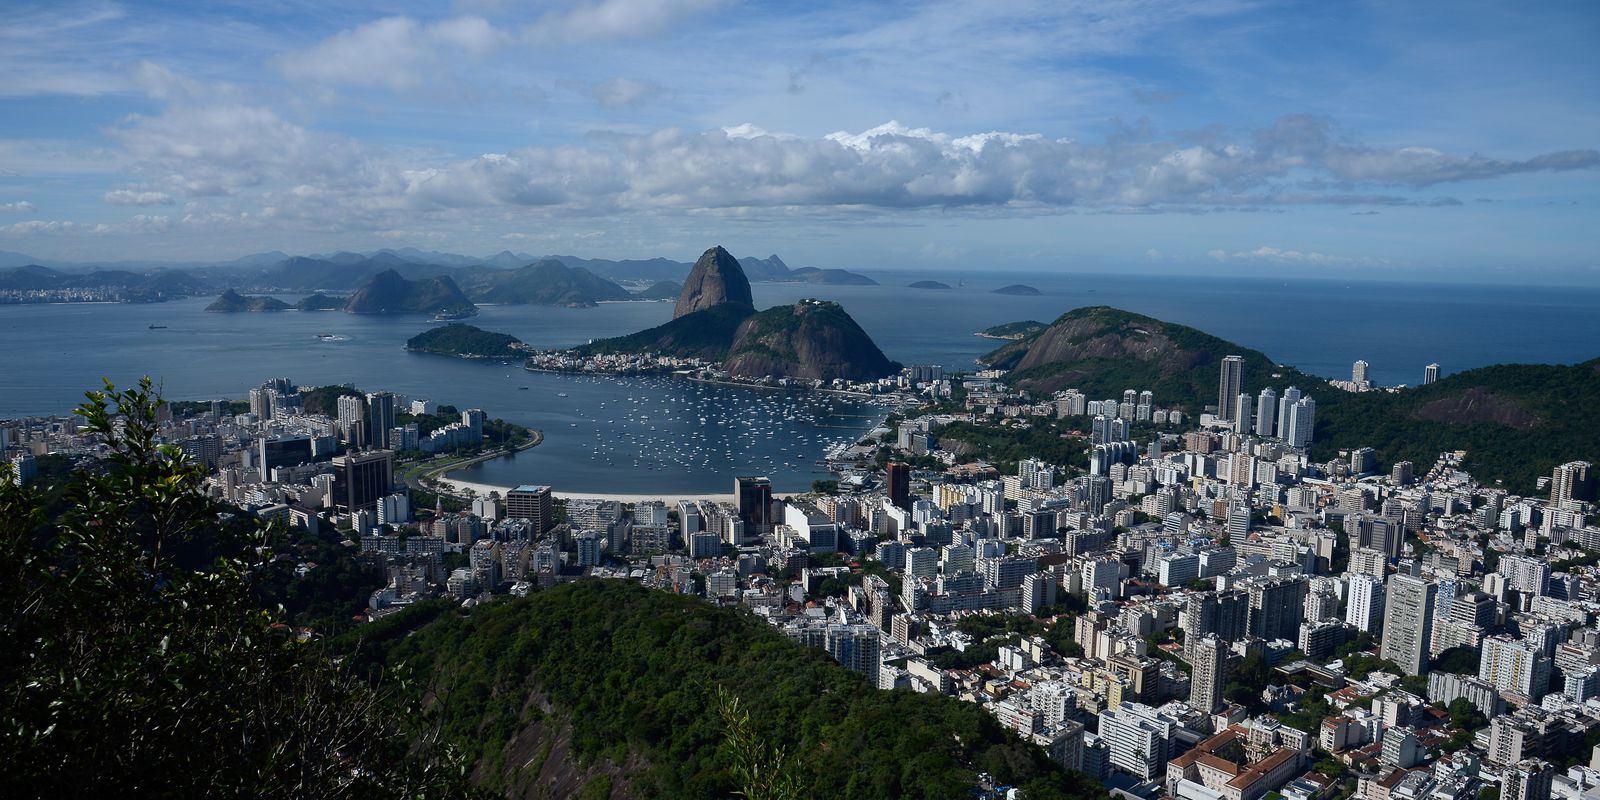 Rio will receive contributions to public notices to promote audiovisual